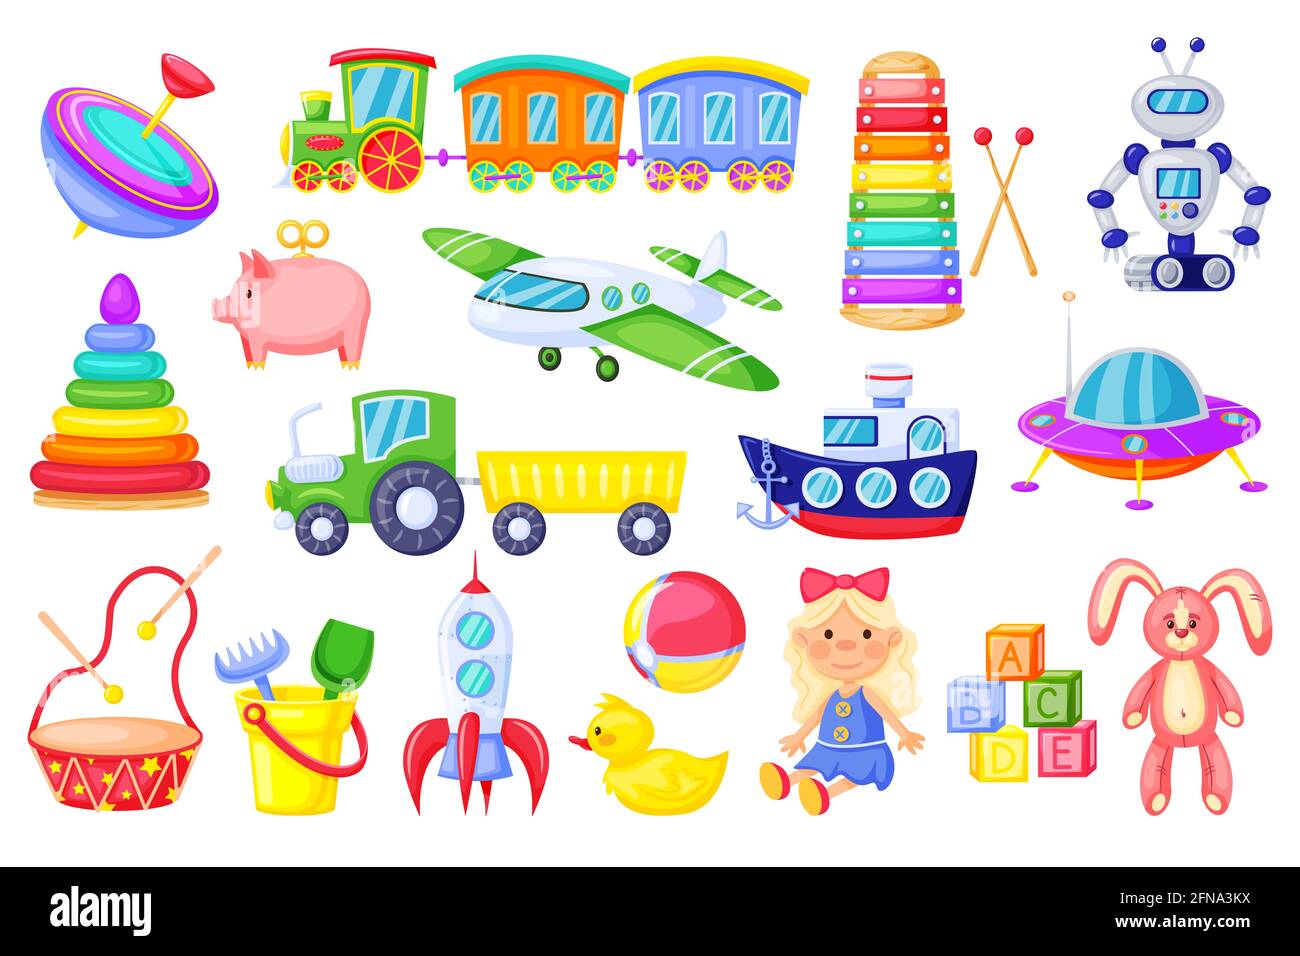 Kids toys. Cartoon rocket, ship, train, cute girl doll, duck, plush bunny, alphabet cubes. Colorful plastic toy for toddlers vector set isolated on white. Objects for children and babies to play Stock Vector